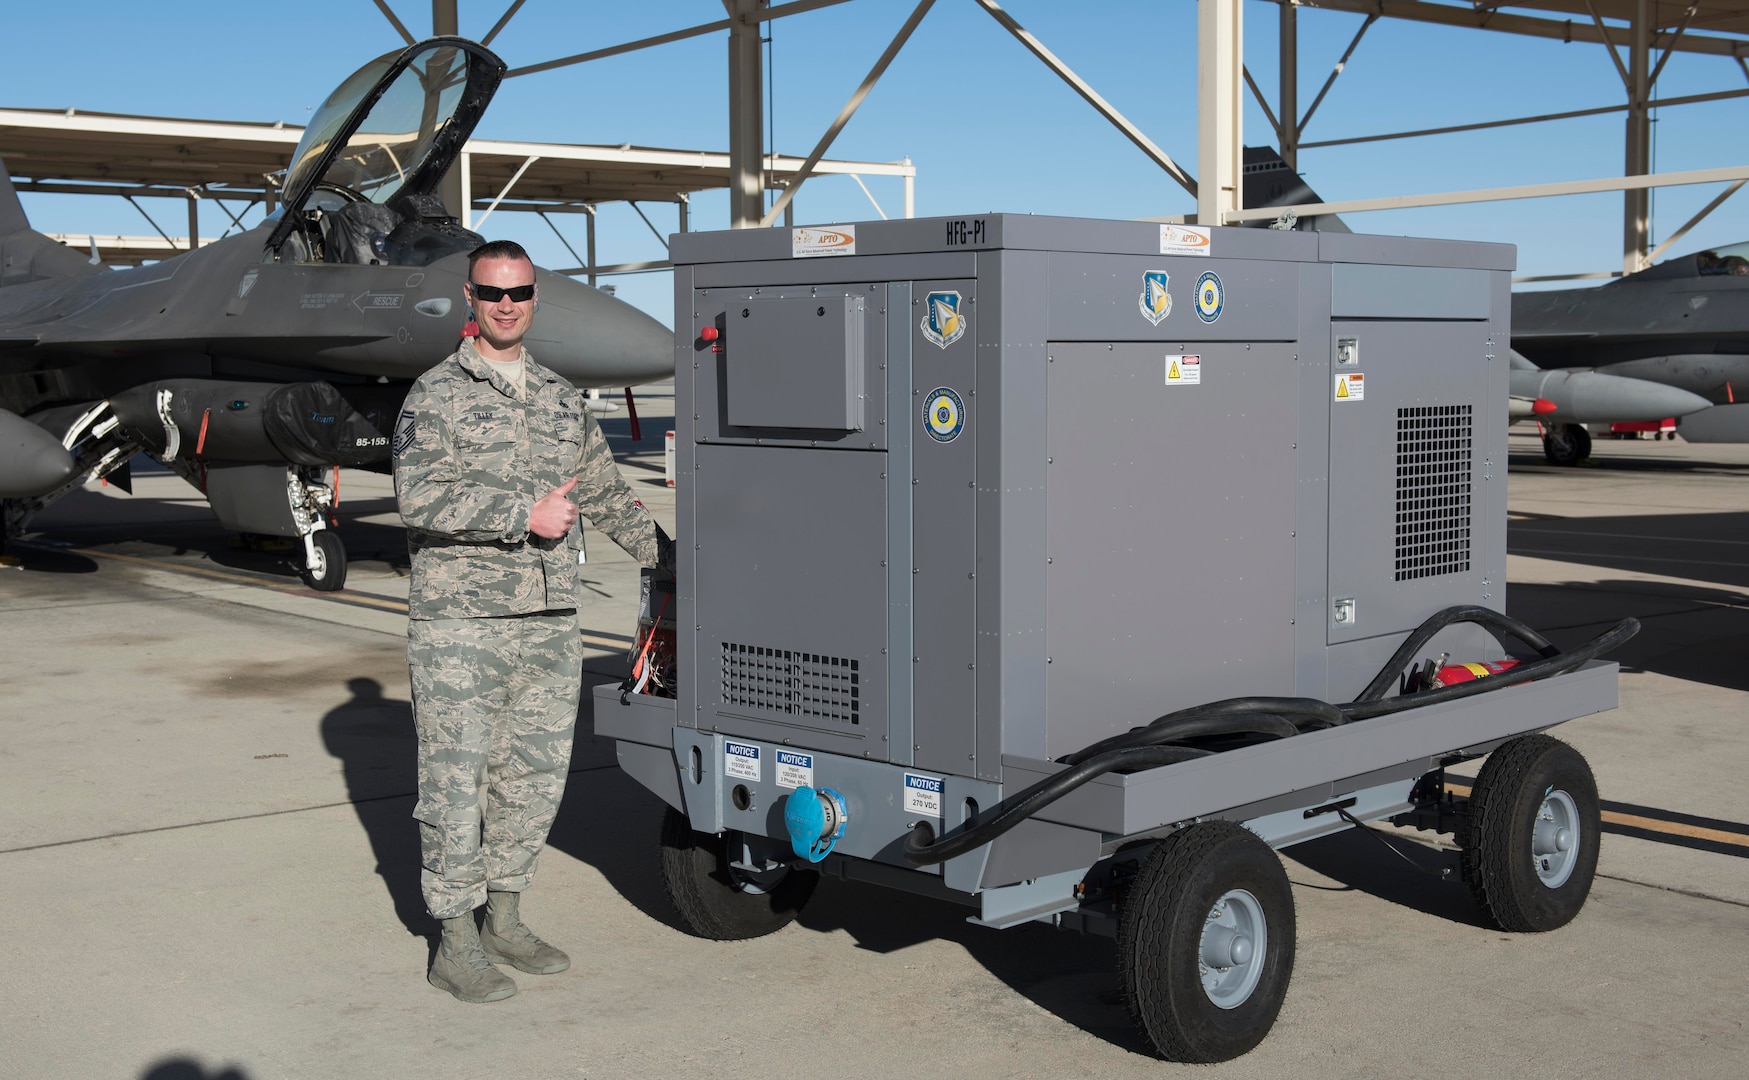 Senior Master Sgt. Jason Tilley, Air Force’s lead for its Aerospace Ground Support Equipment Working Group, said the demonstrations at Edwards show hybrid generators can operate on the flightline and believes the Air Force can use more electric and hybrid-electric systems. (U.S. Air Force photo by Brad White)